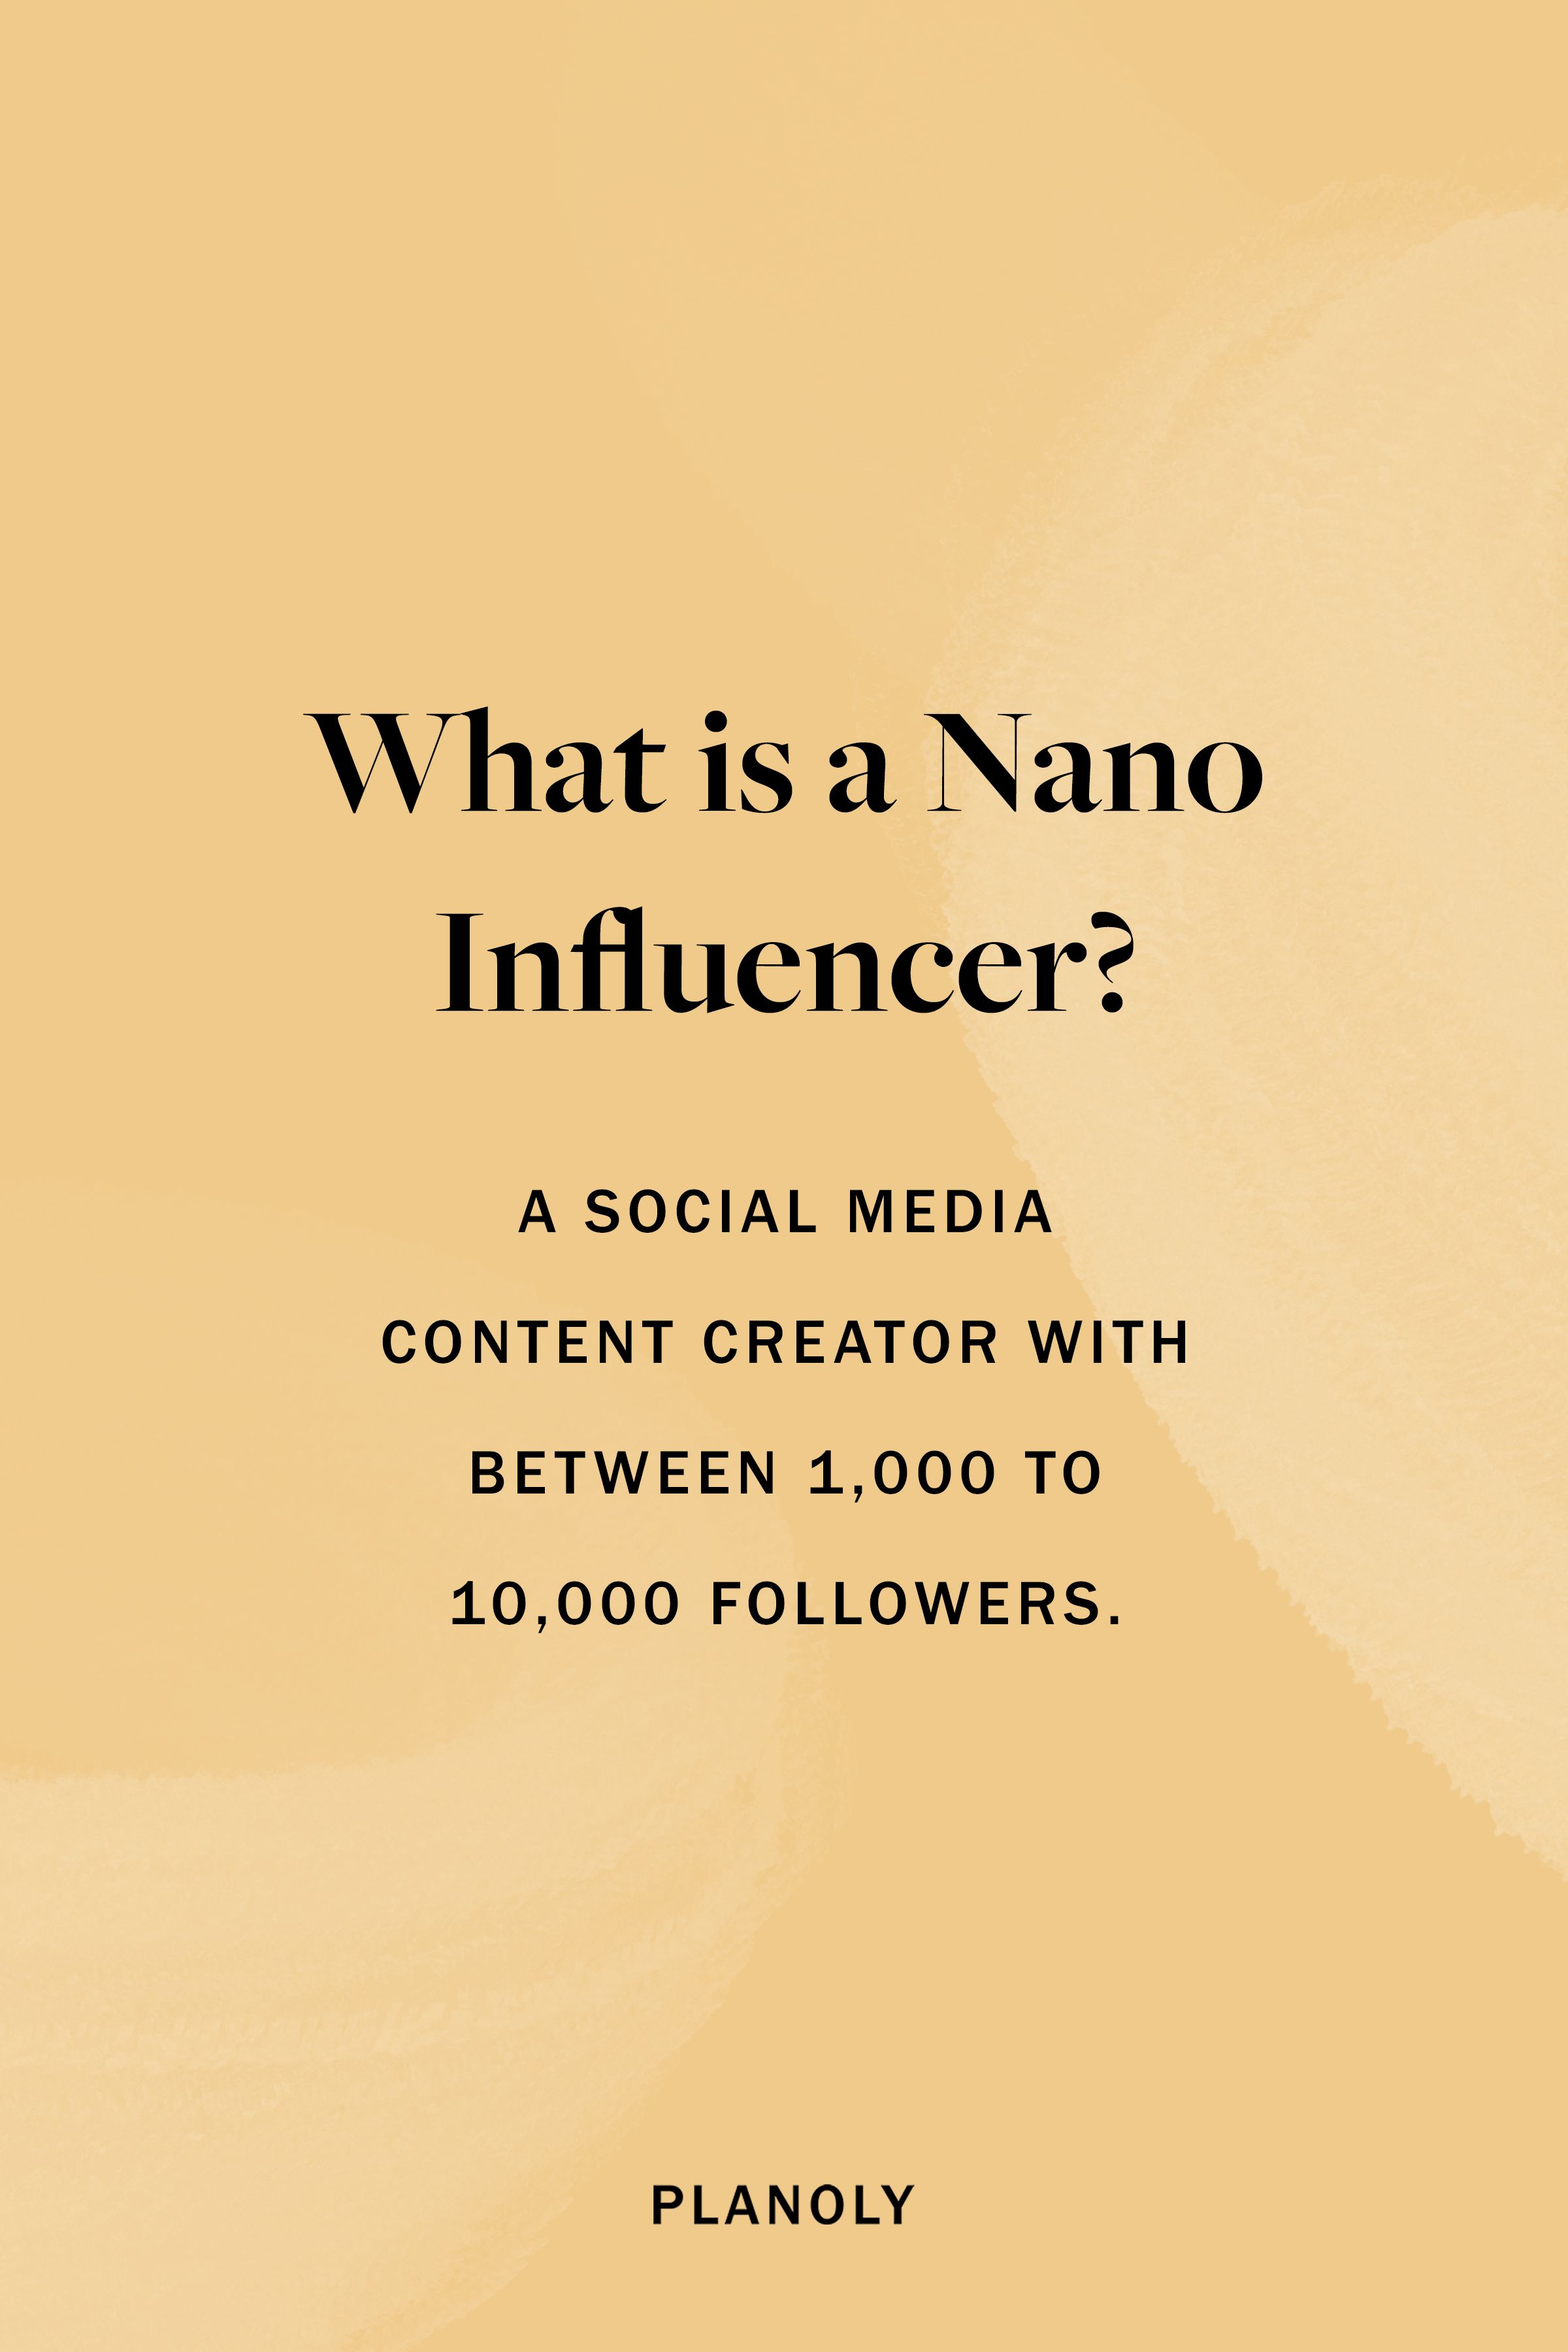 PLANOLY - Blog Post - What is a Nano Influencer - Image 1